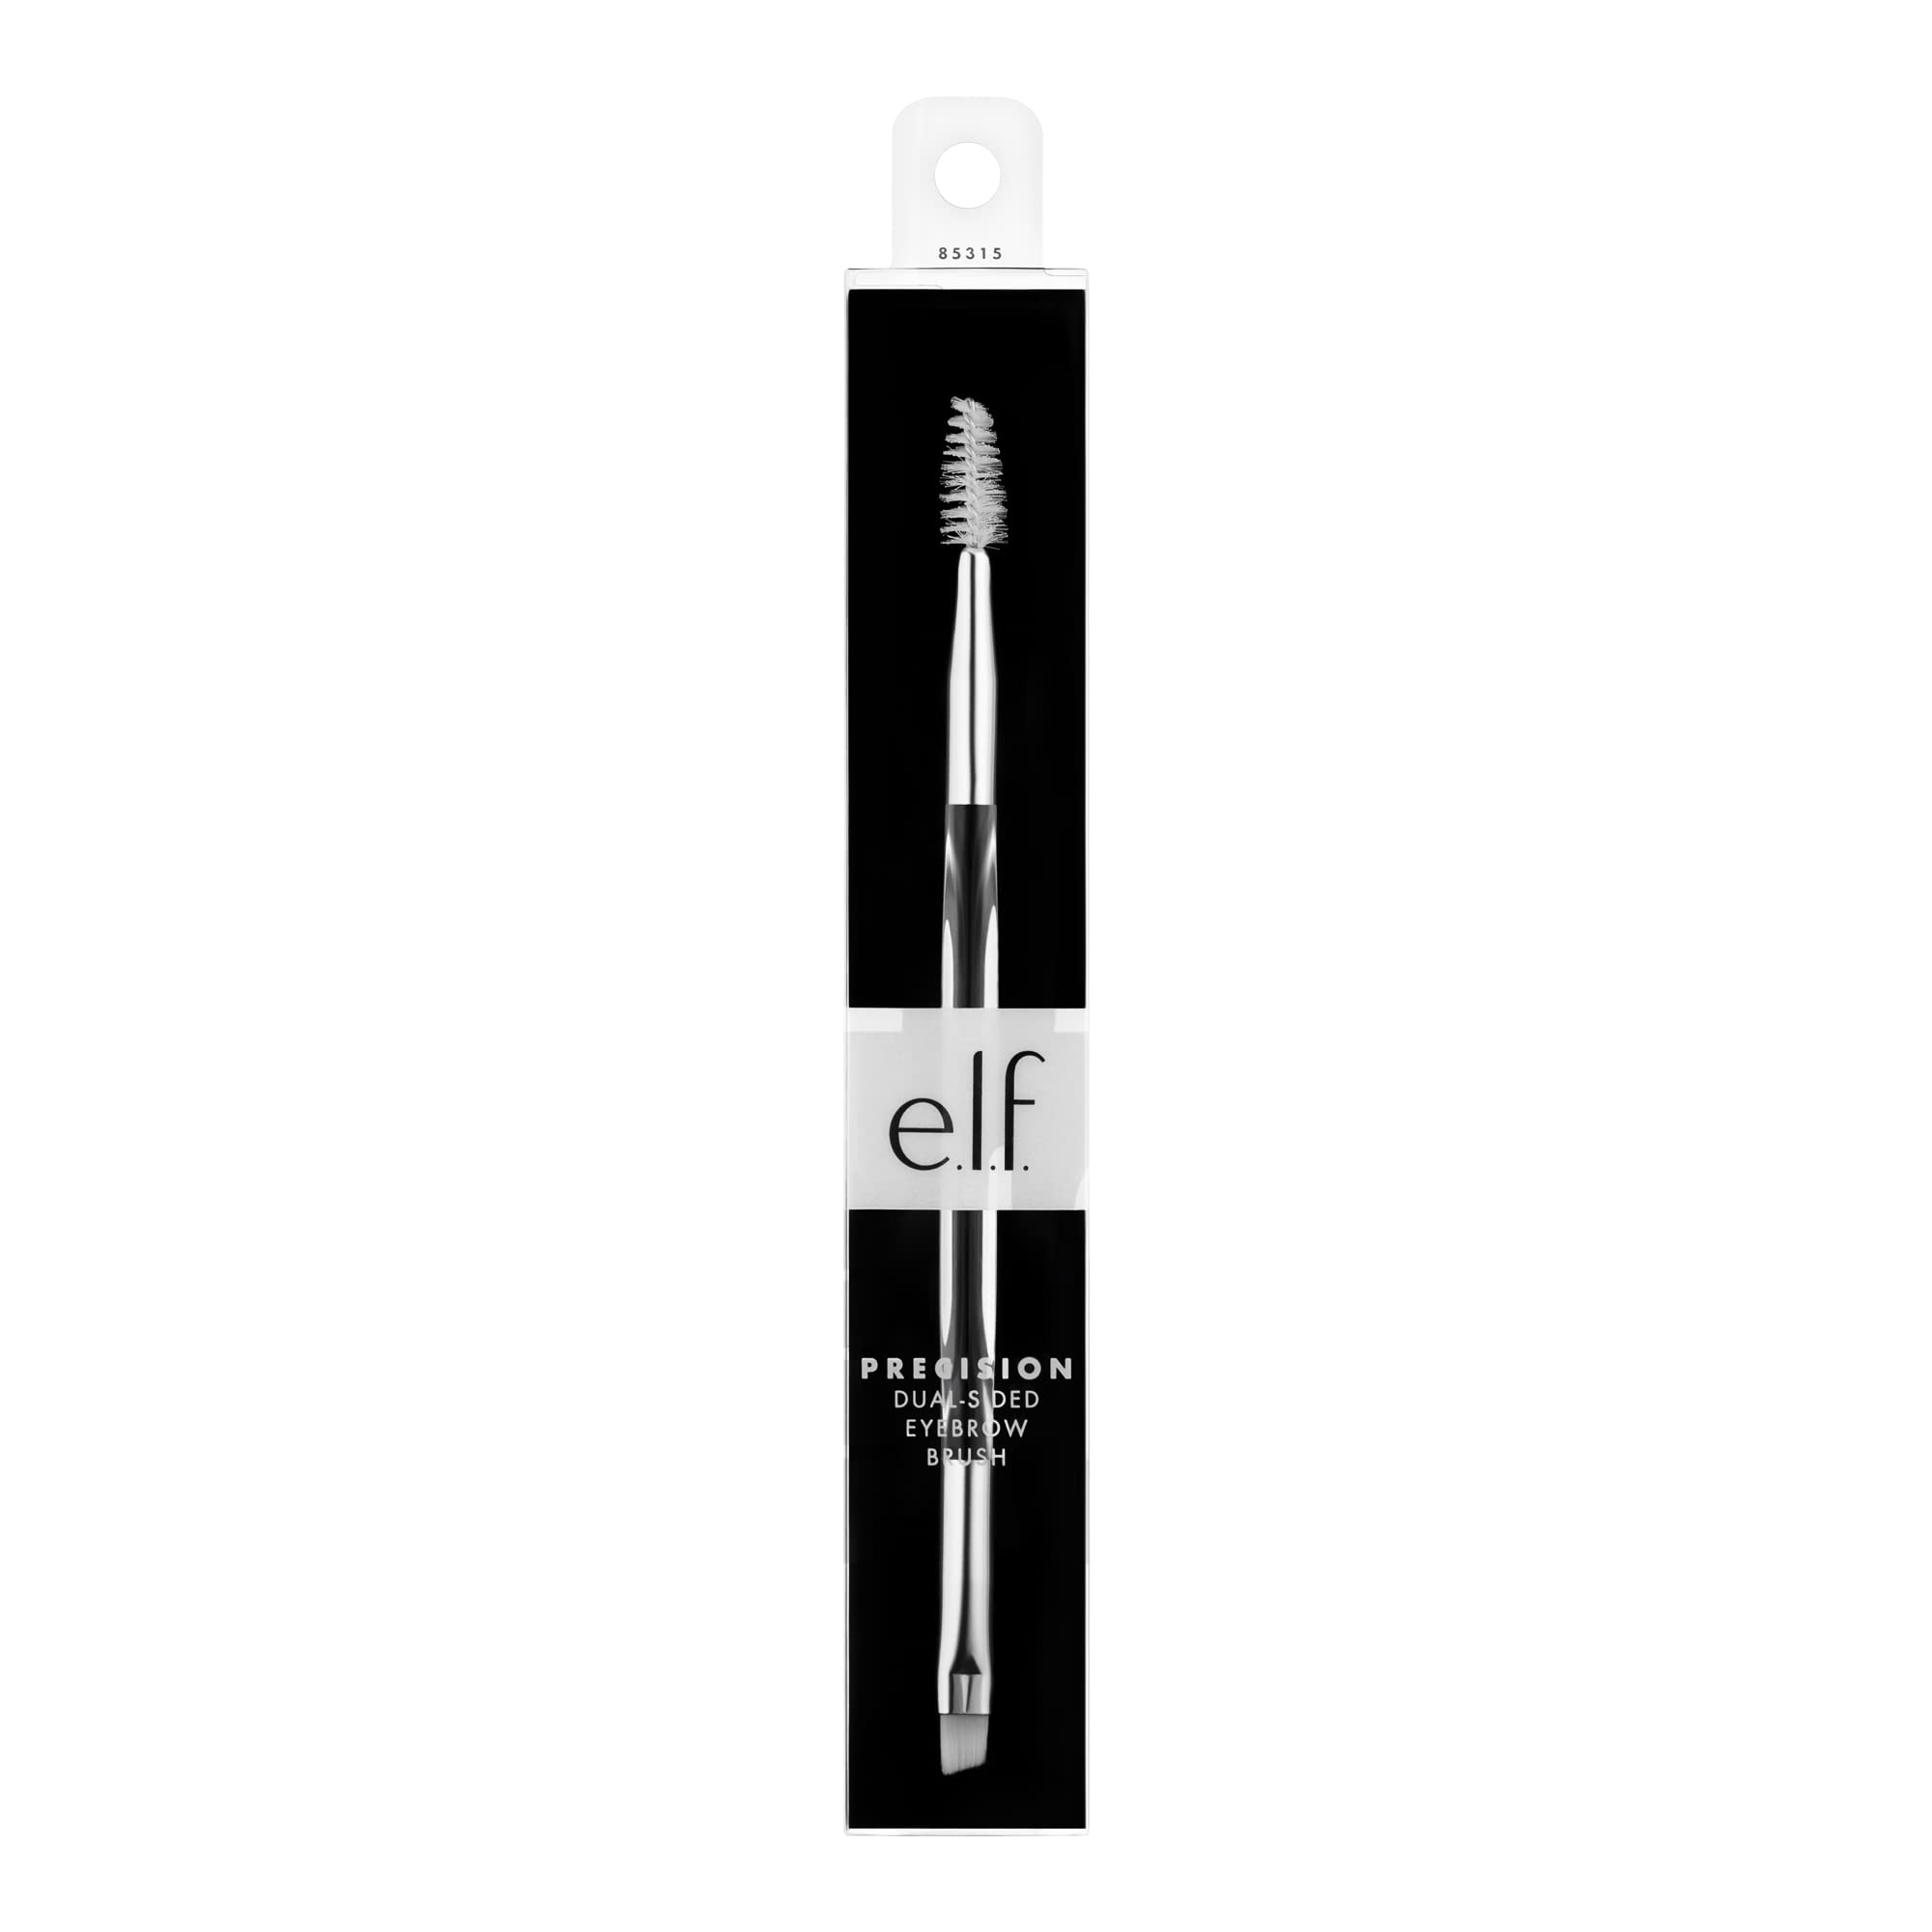 e.l.f. Precision Dual-Sided Eyebrow Brush, Synthetic